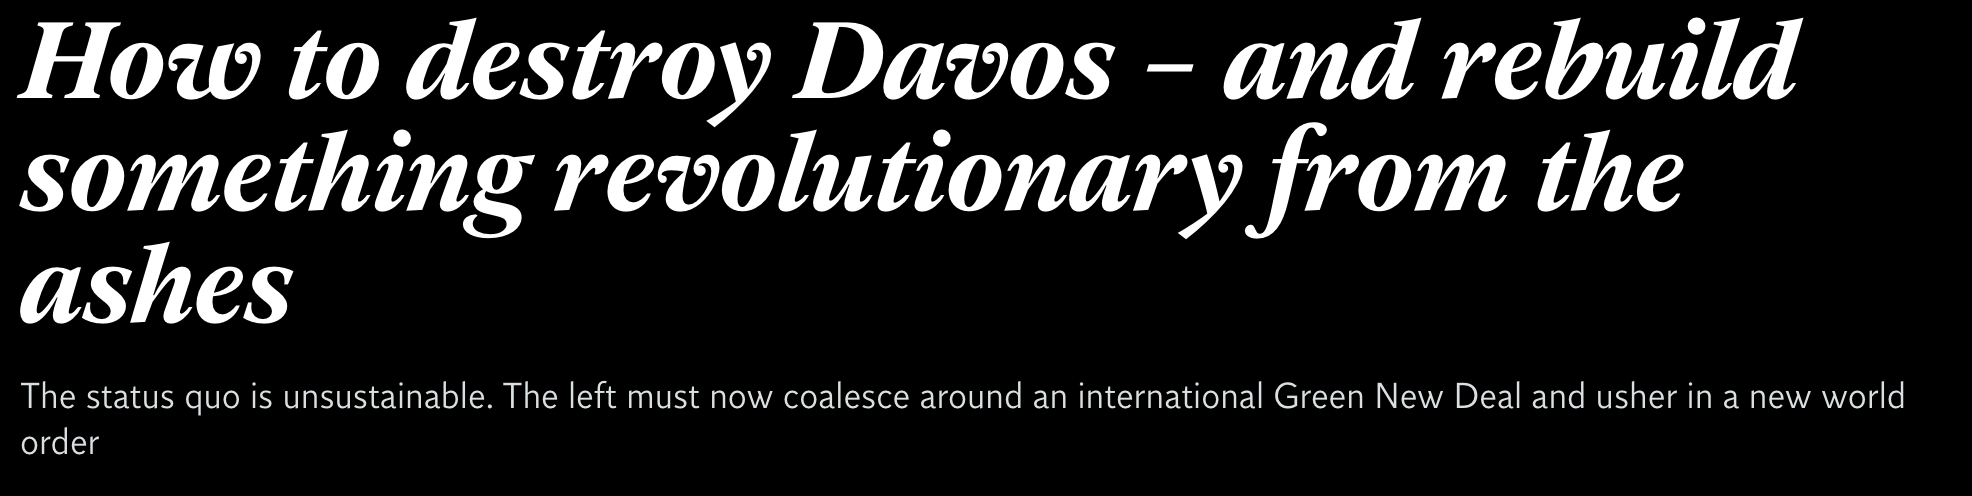 What to think of the Left Nationalists. And how to destroy Davos. Two must-read articles by David Adler